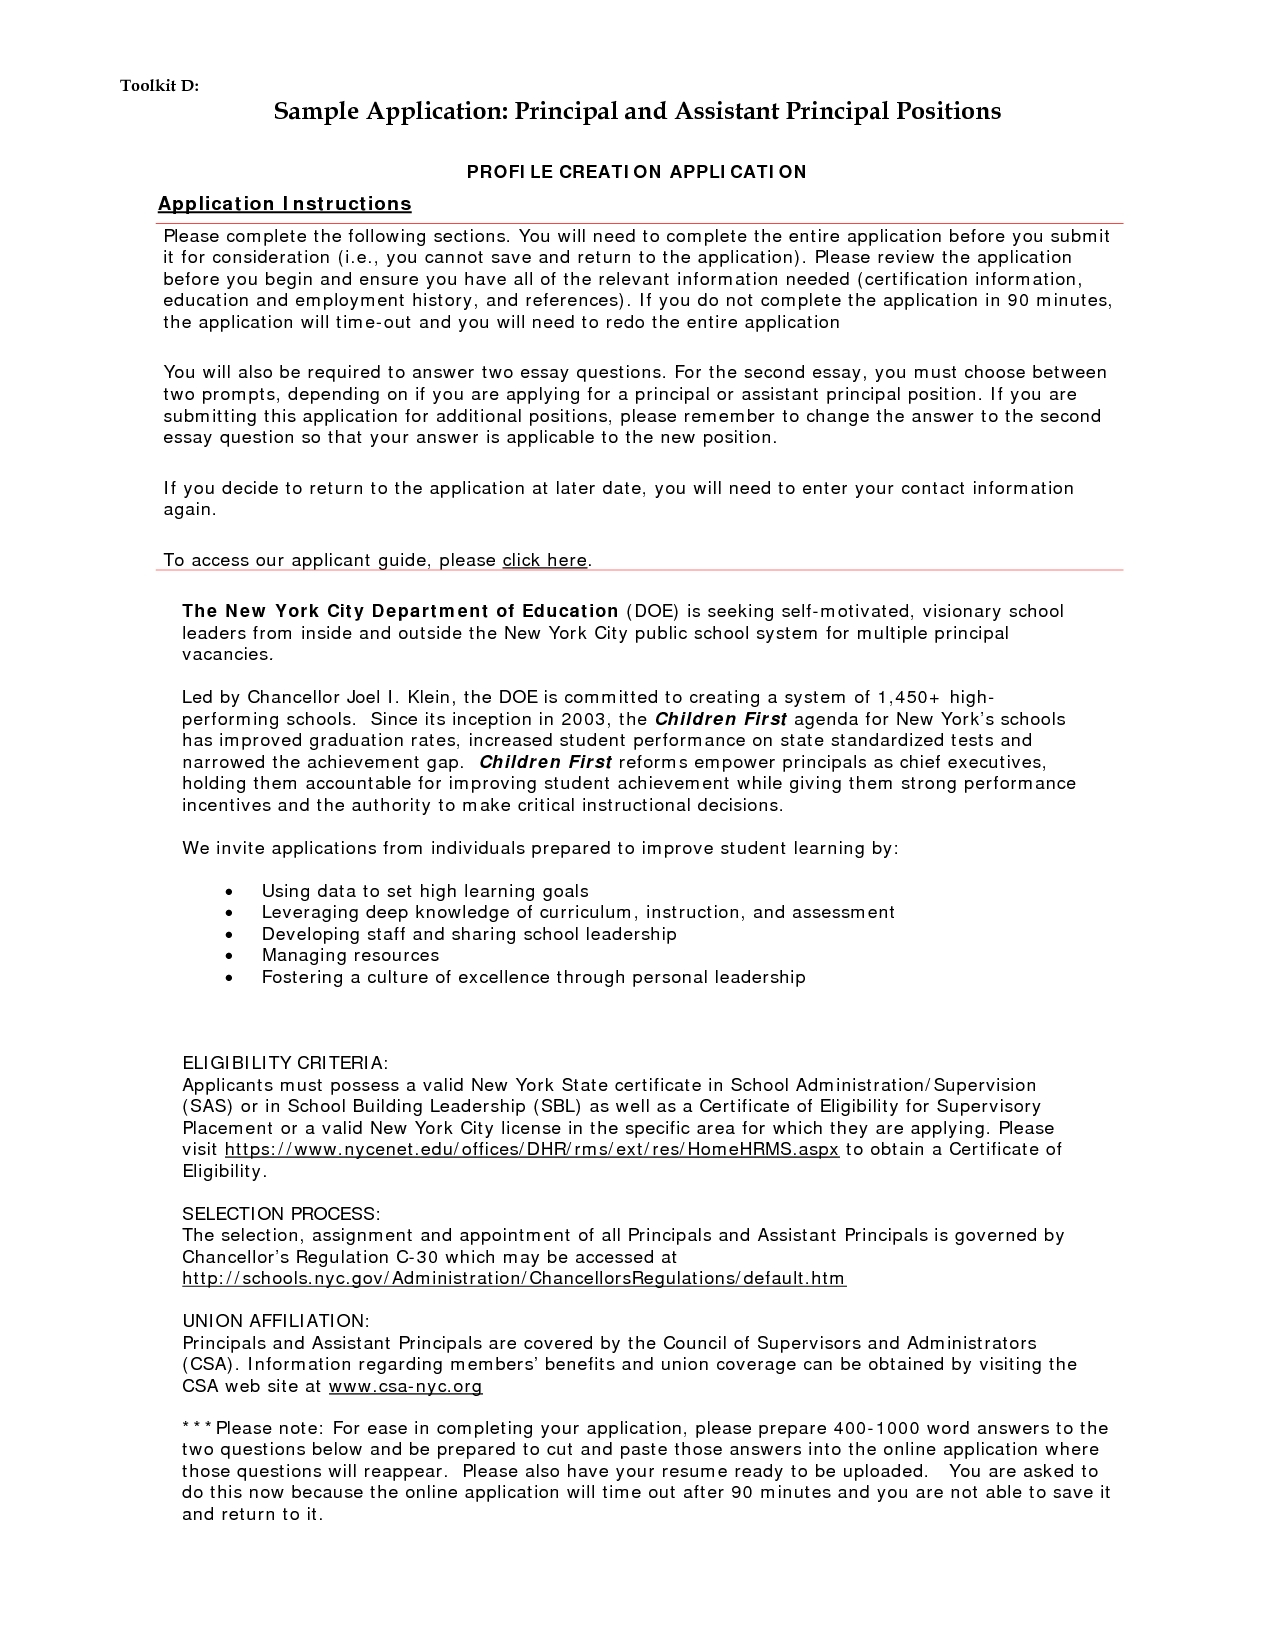 Assistant Principal Resume The Easiest Sample Resume Cover Letter For Assistant Principal